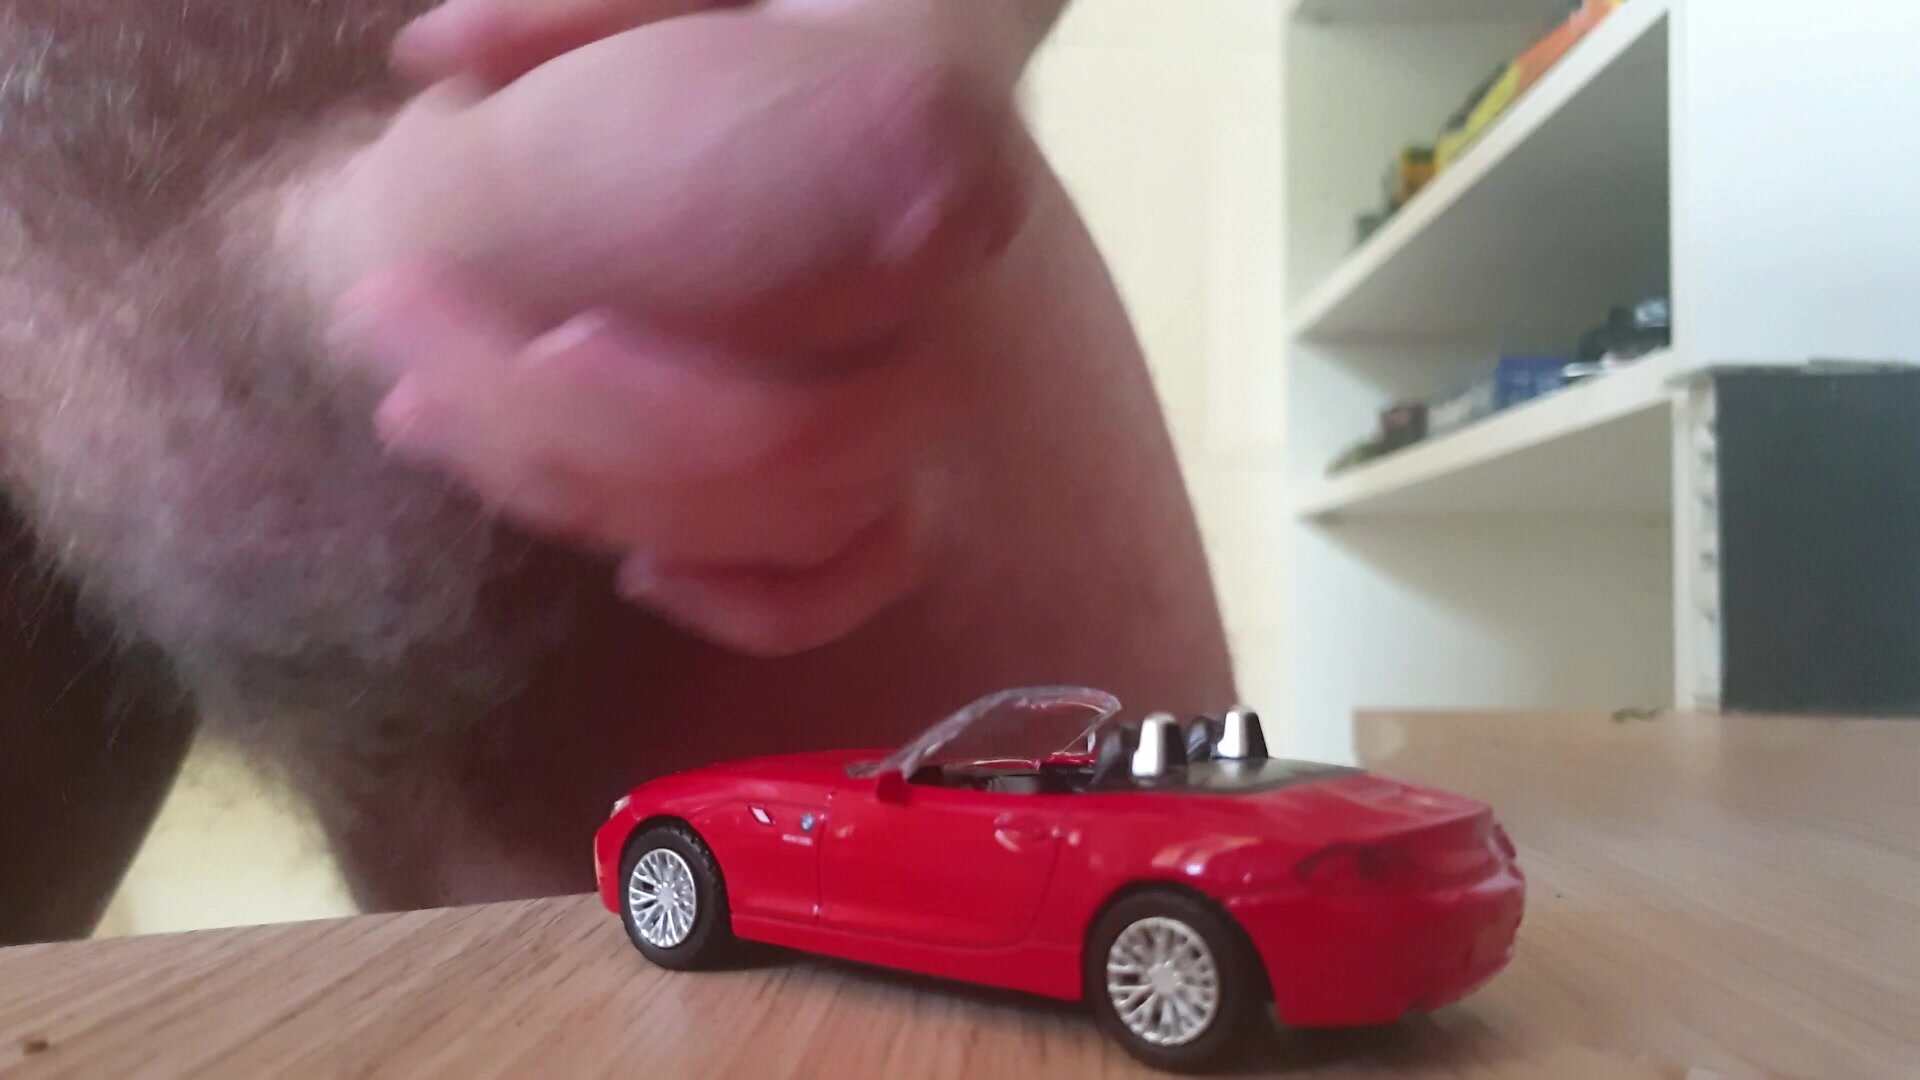 Fapping + small car = ?